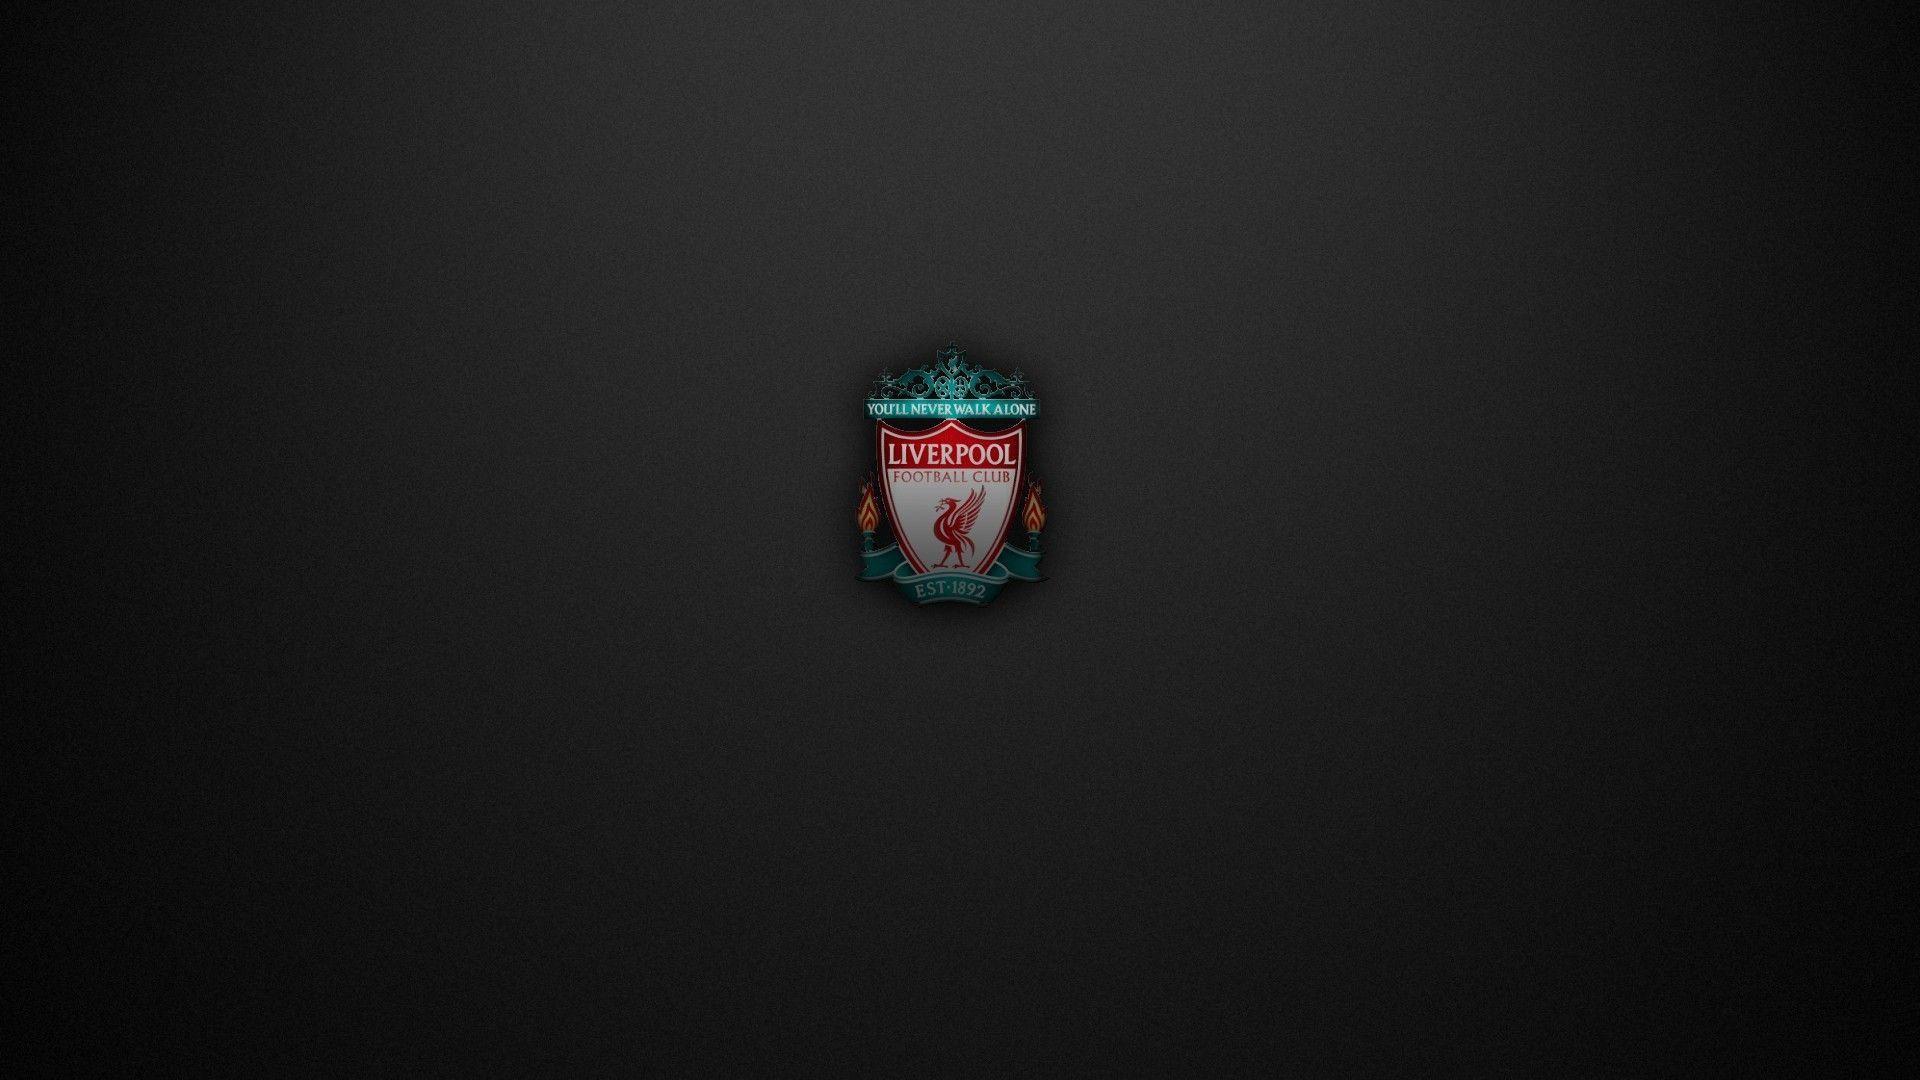 Liverpool Wallpaper For Android Liverpool Fc Image. HD